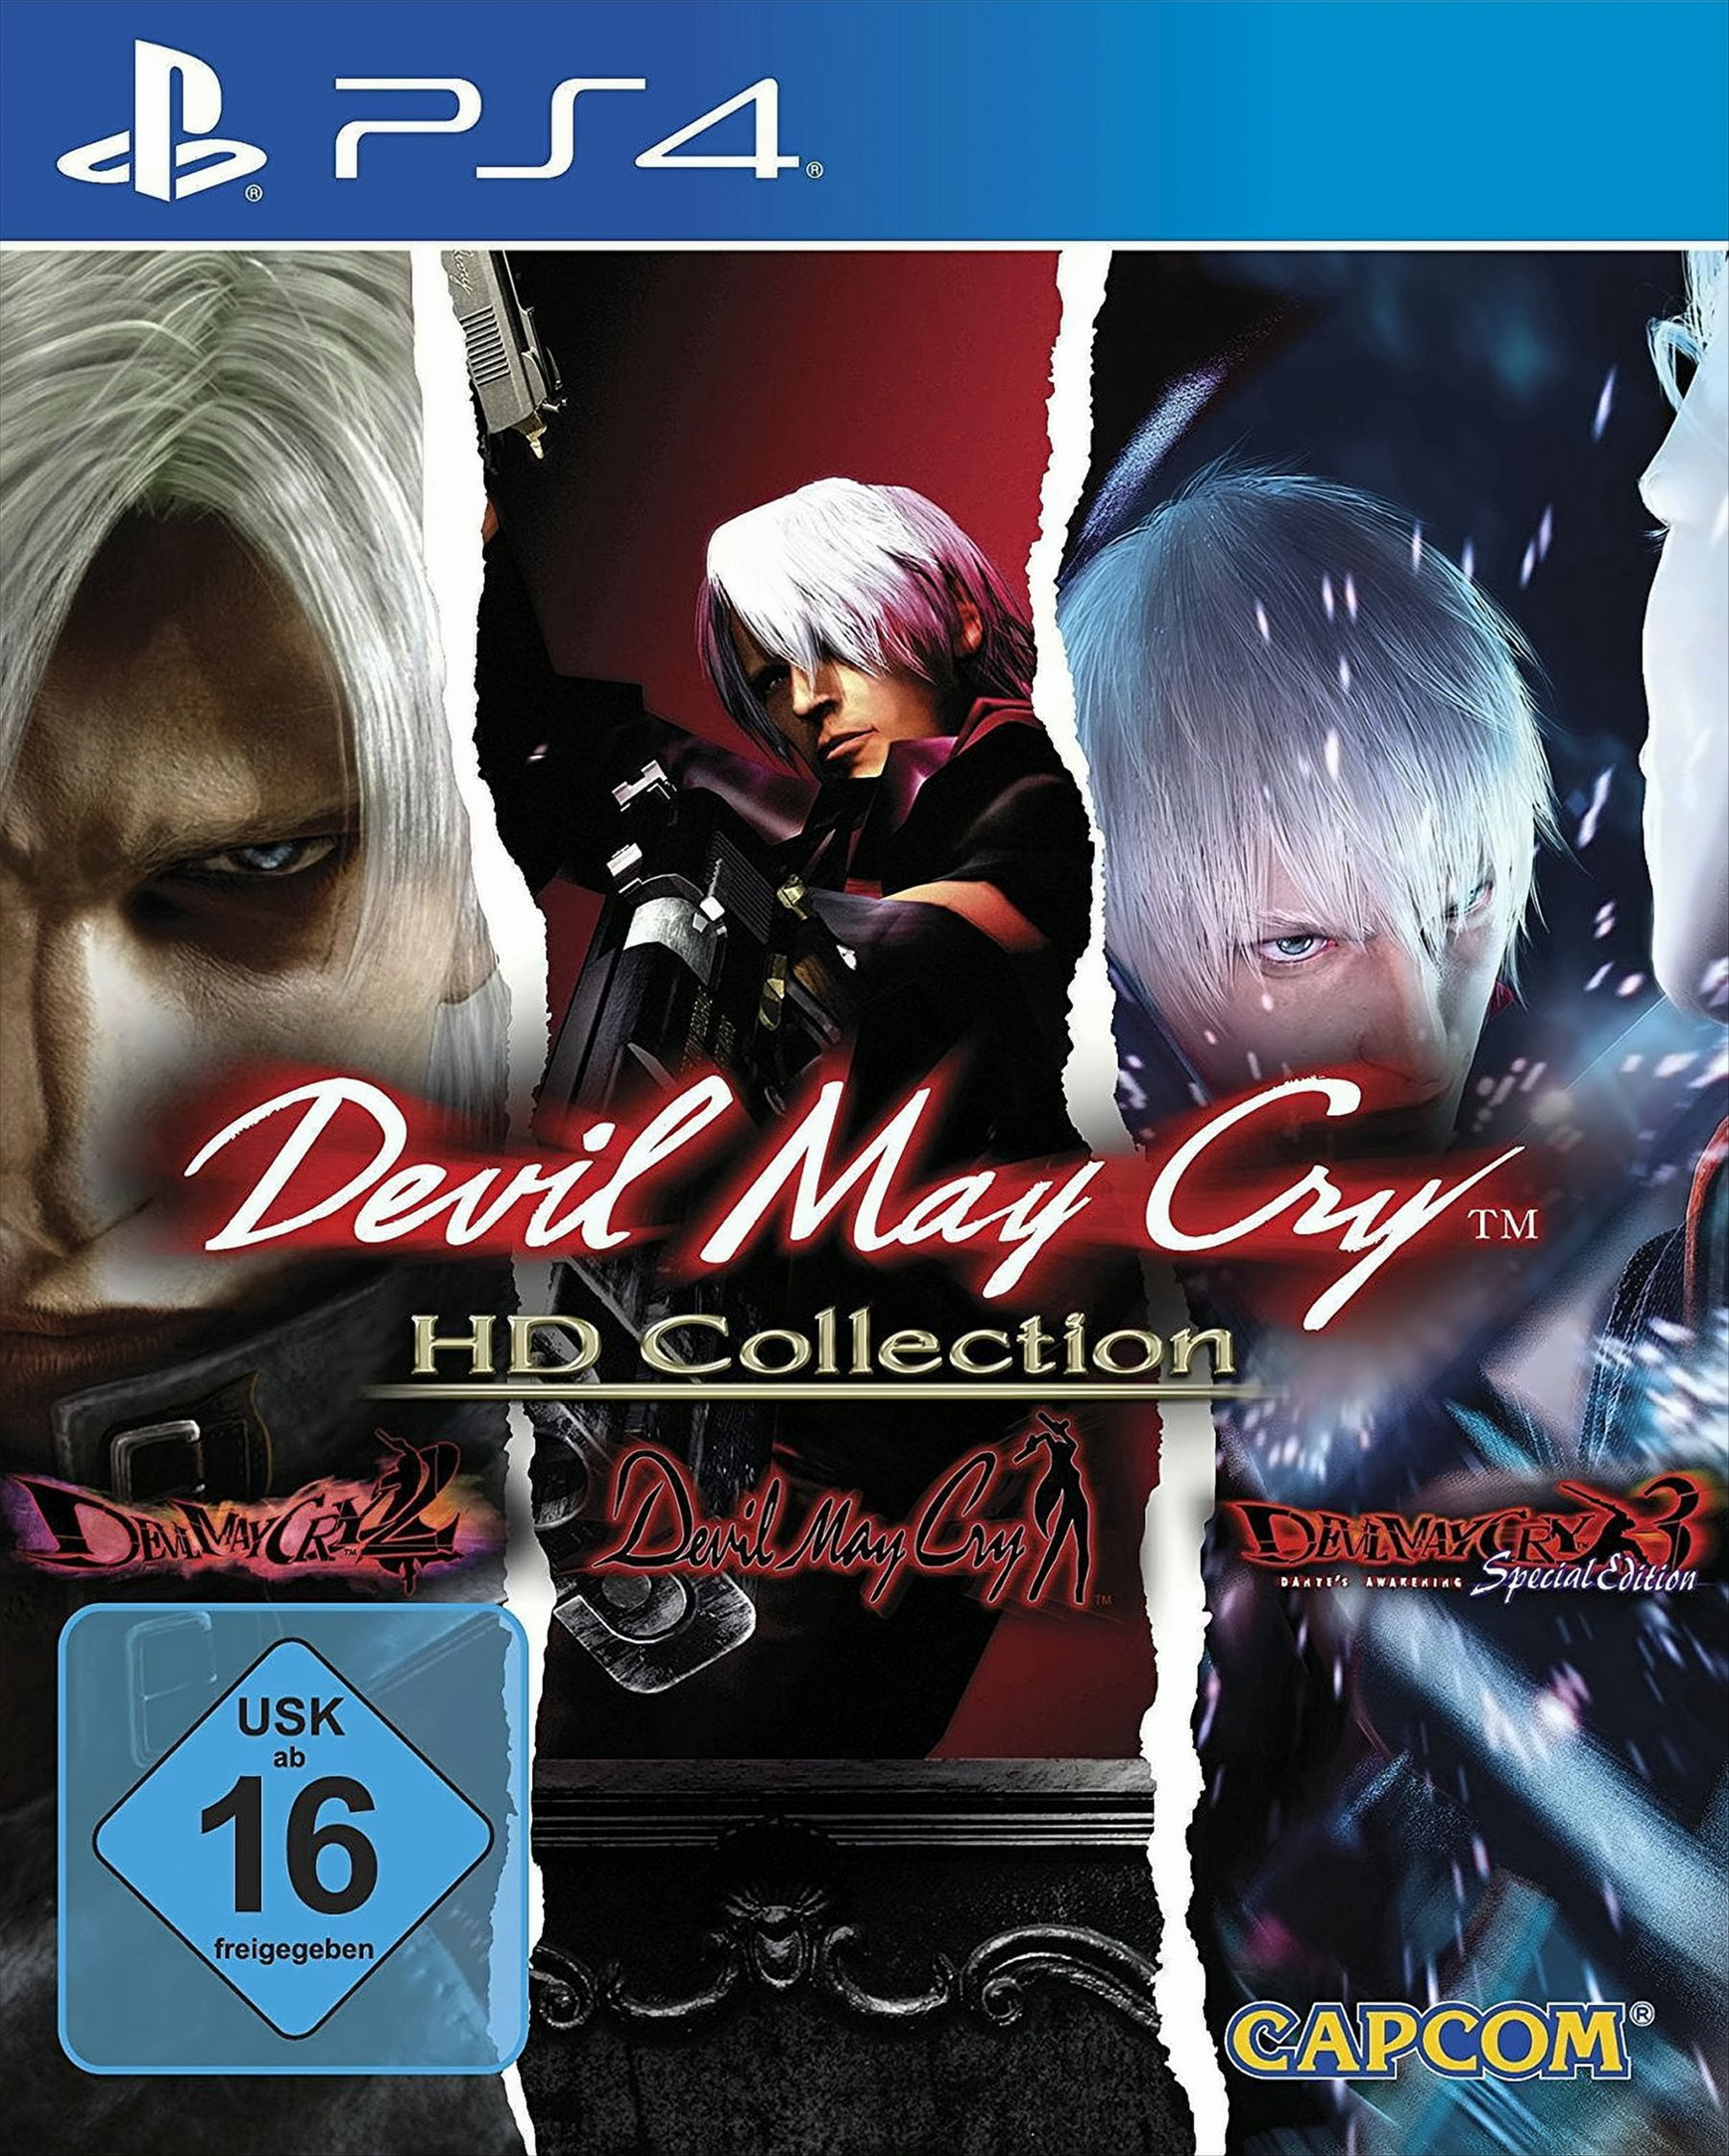 - May 4] [PlayStation Devil HD Collection Cry